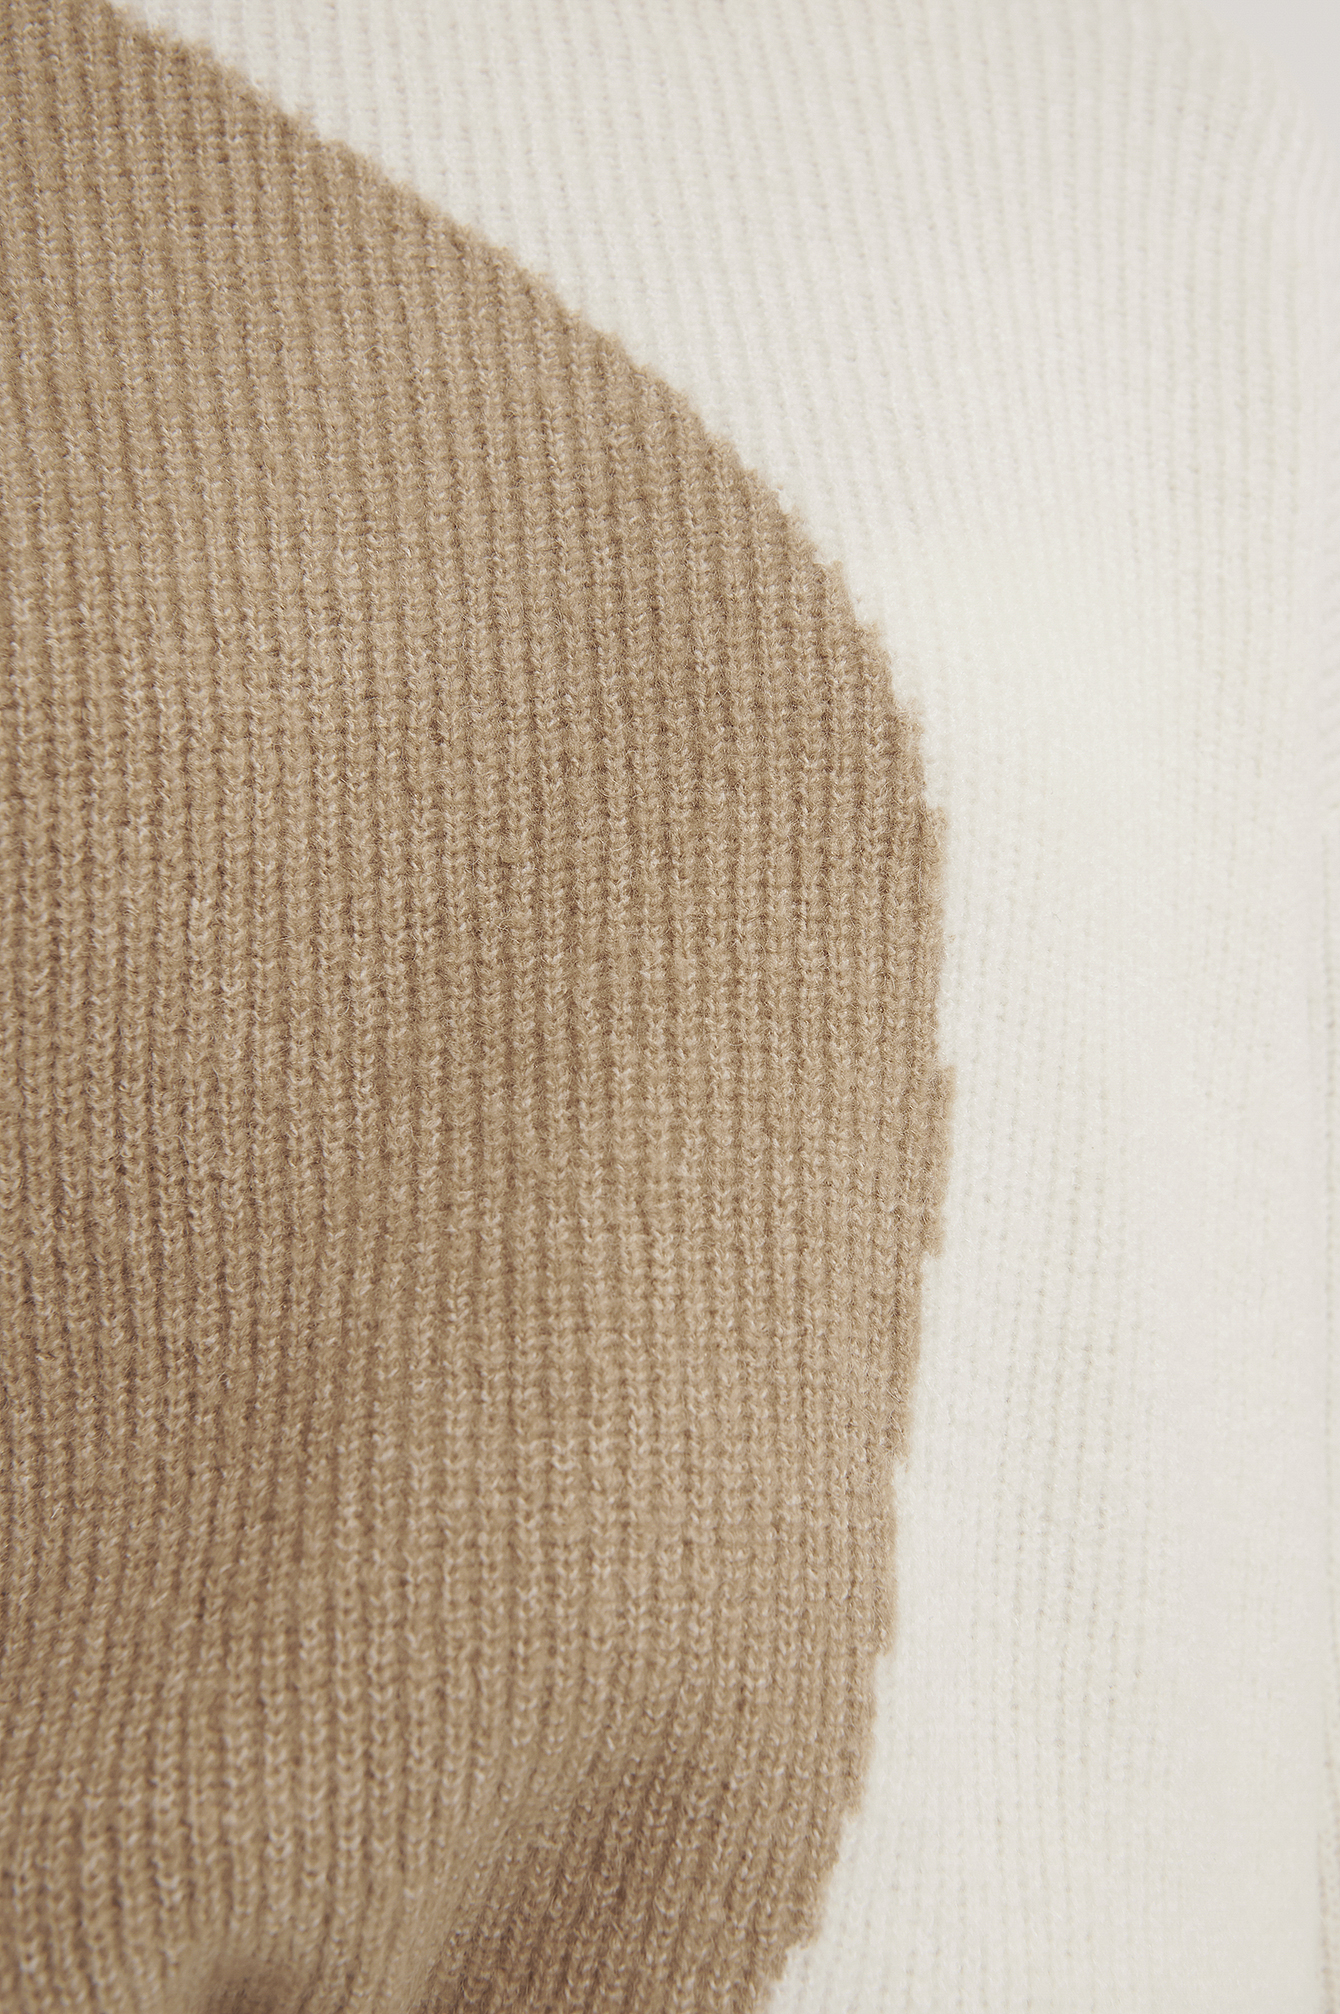 Beige/White Two Colored Knitted Sweater